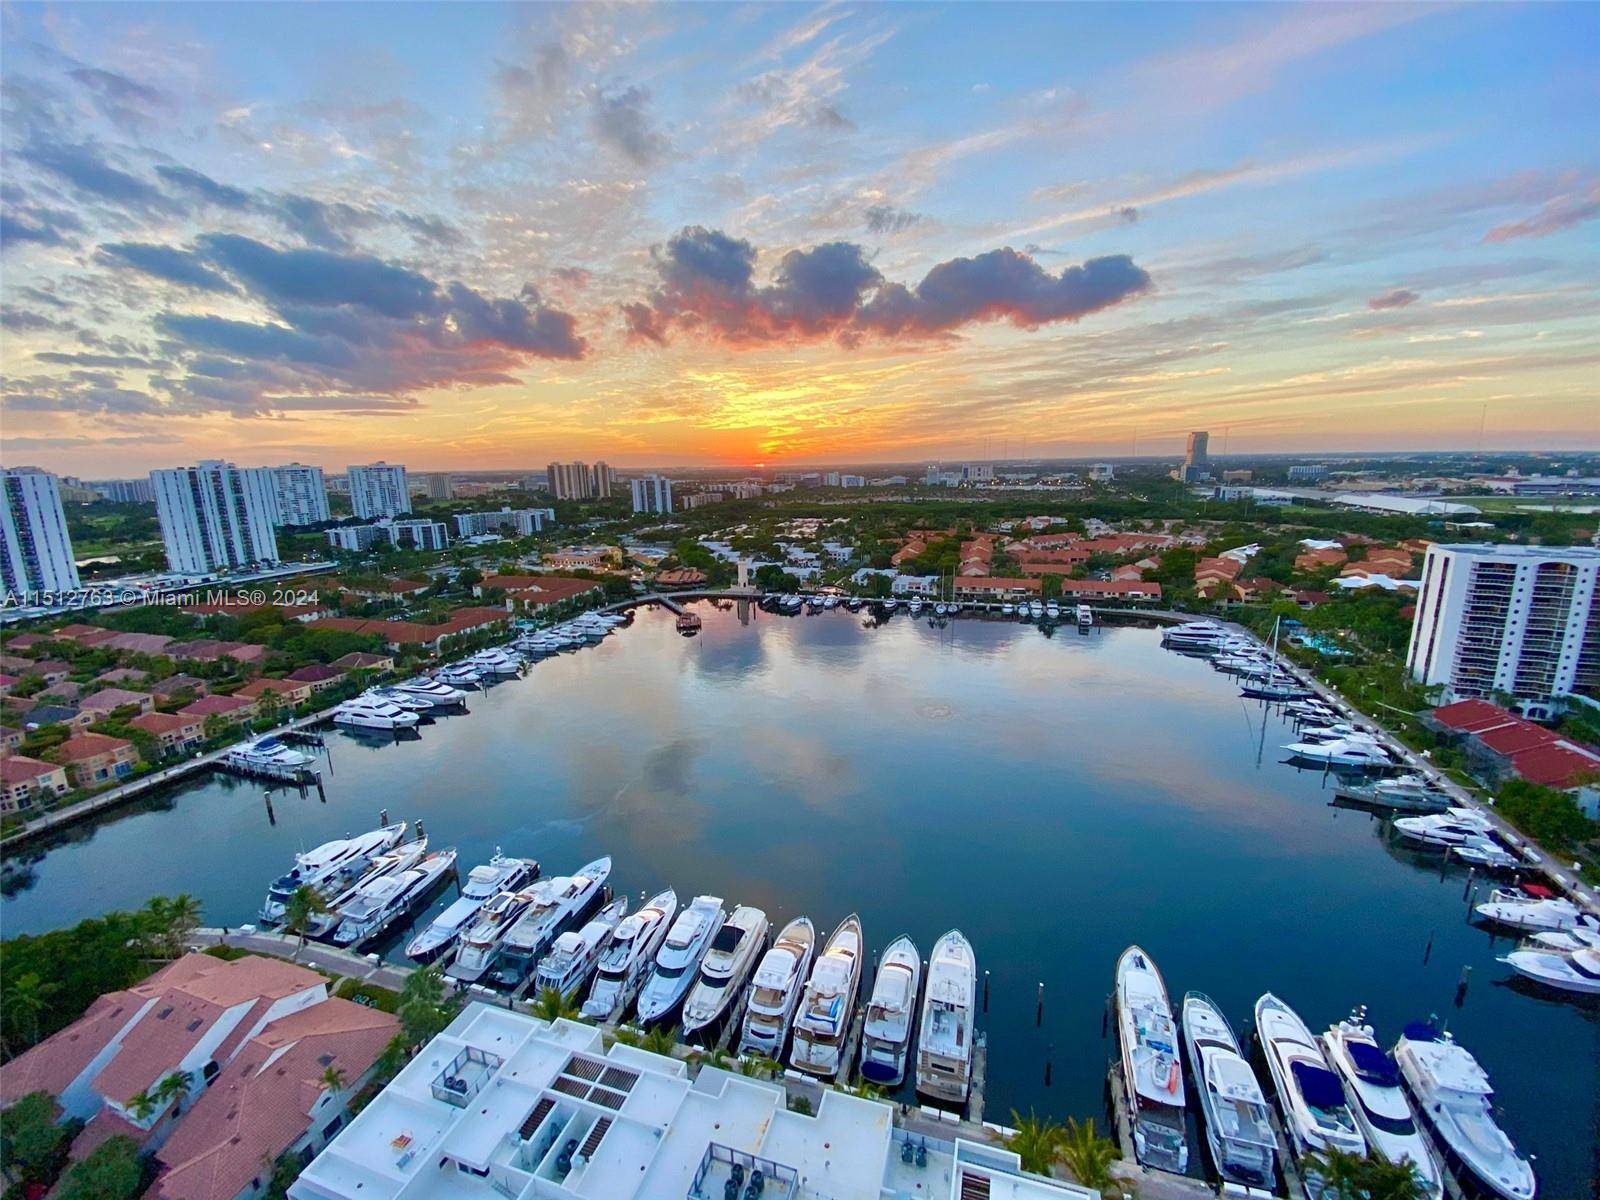 Exceptional opportunity to own a rarely listed 100x25 ft slip in the prime private gated Waterways Marina.